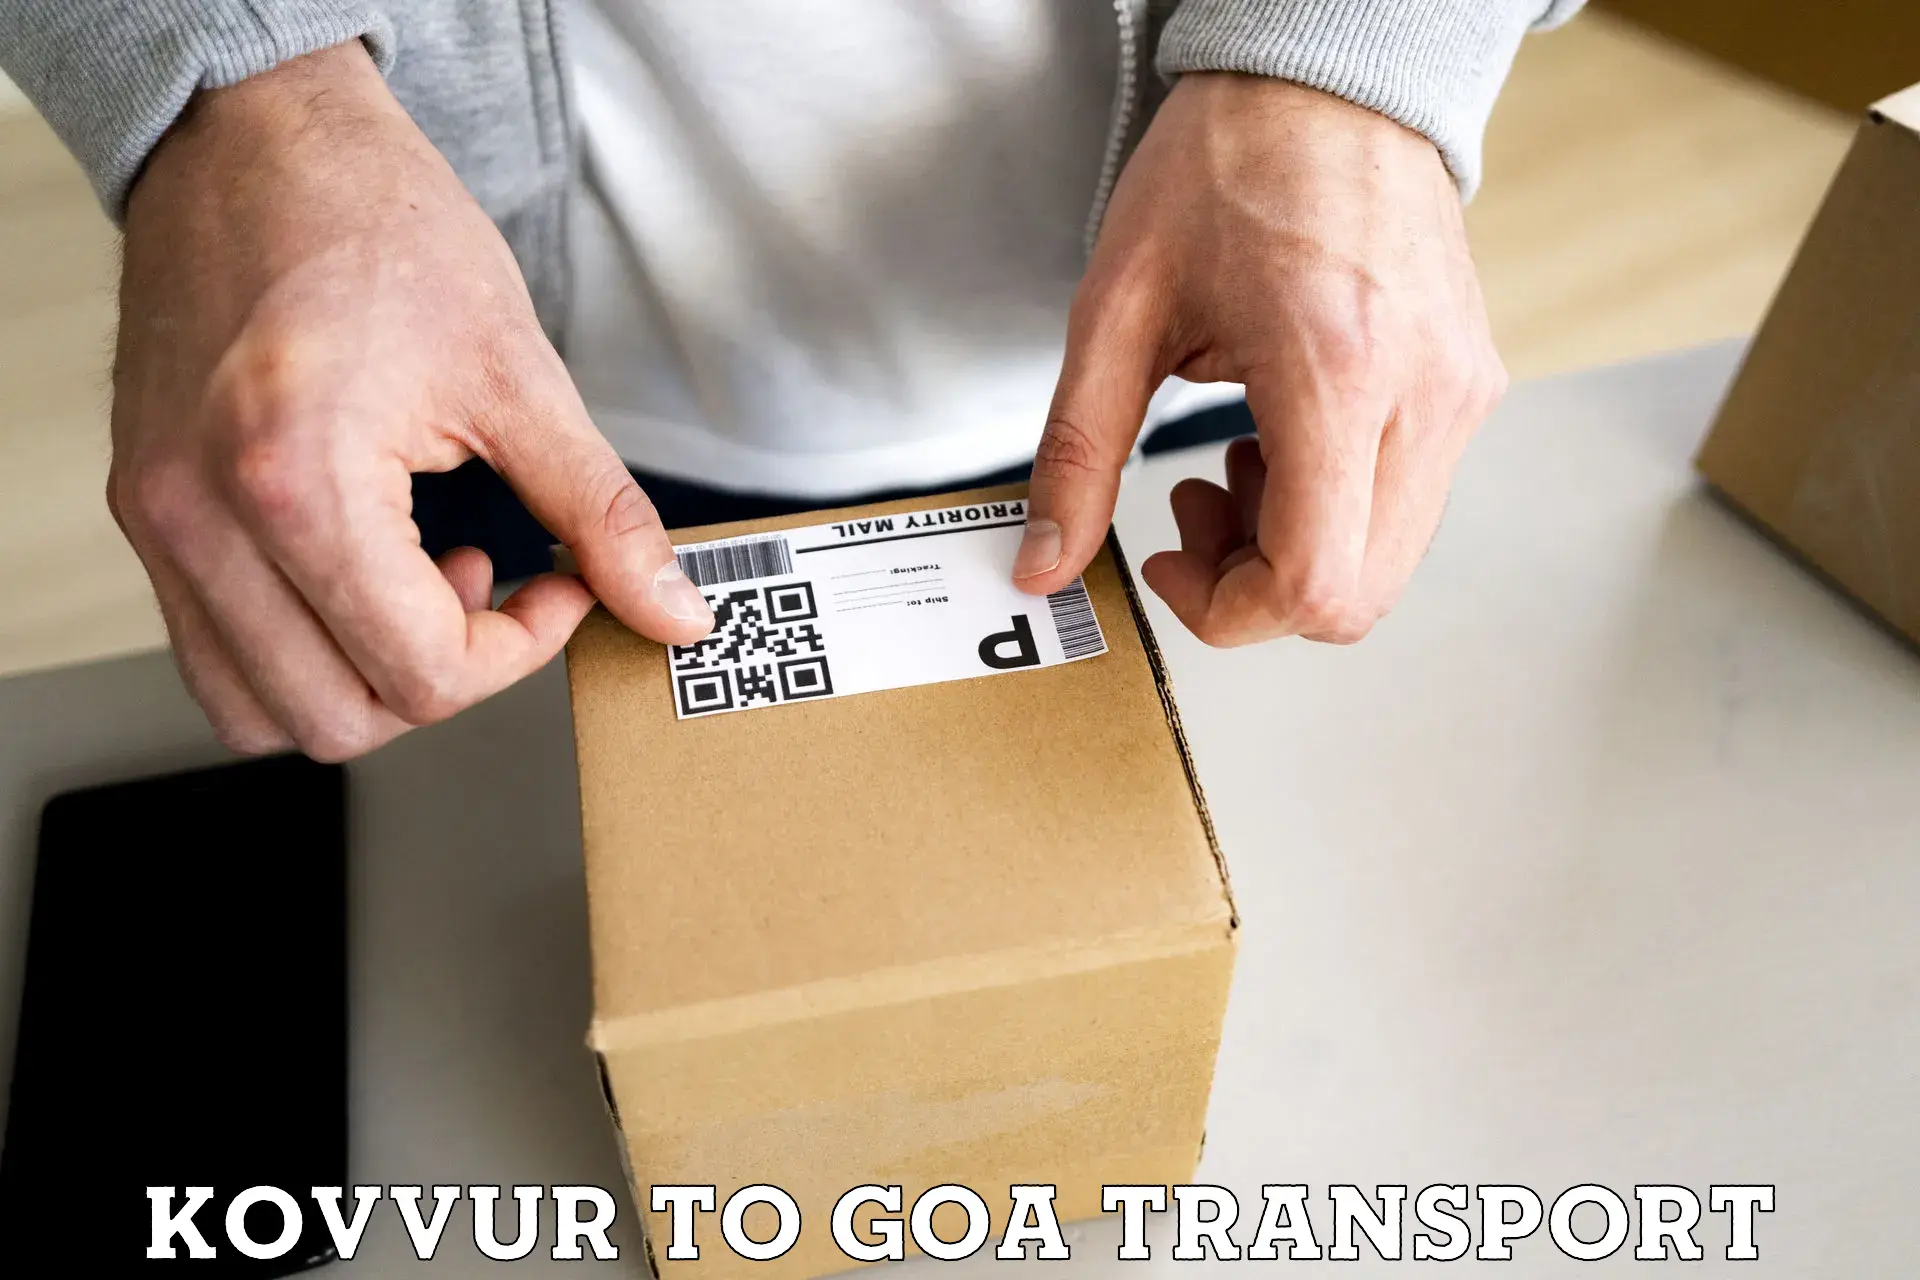 Container transportation services Kovvur to IIT Goa